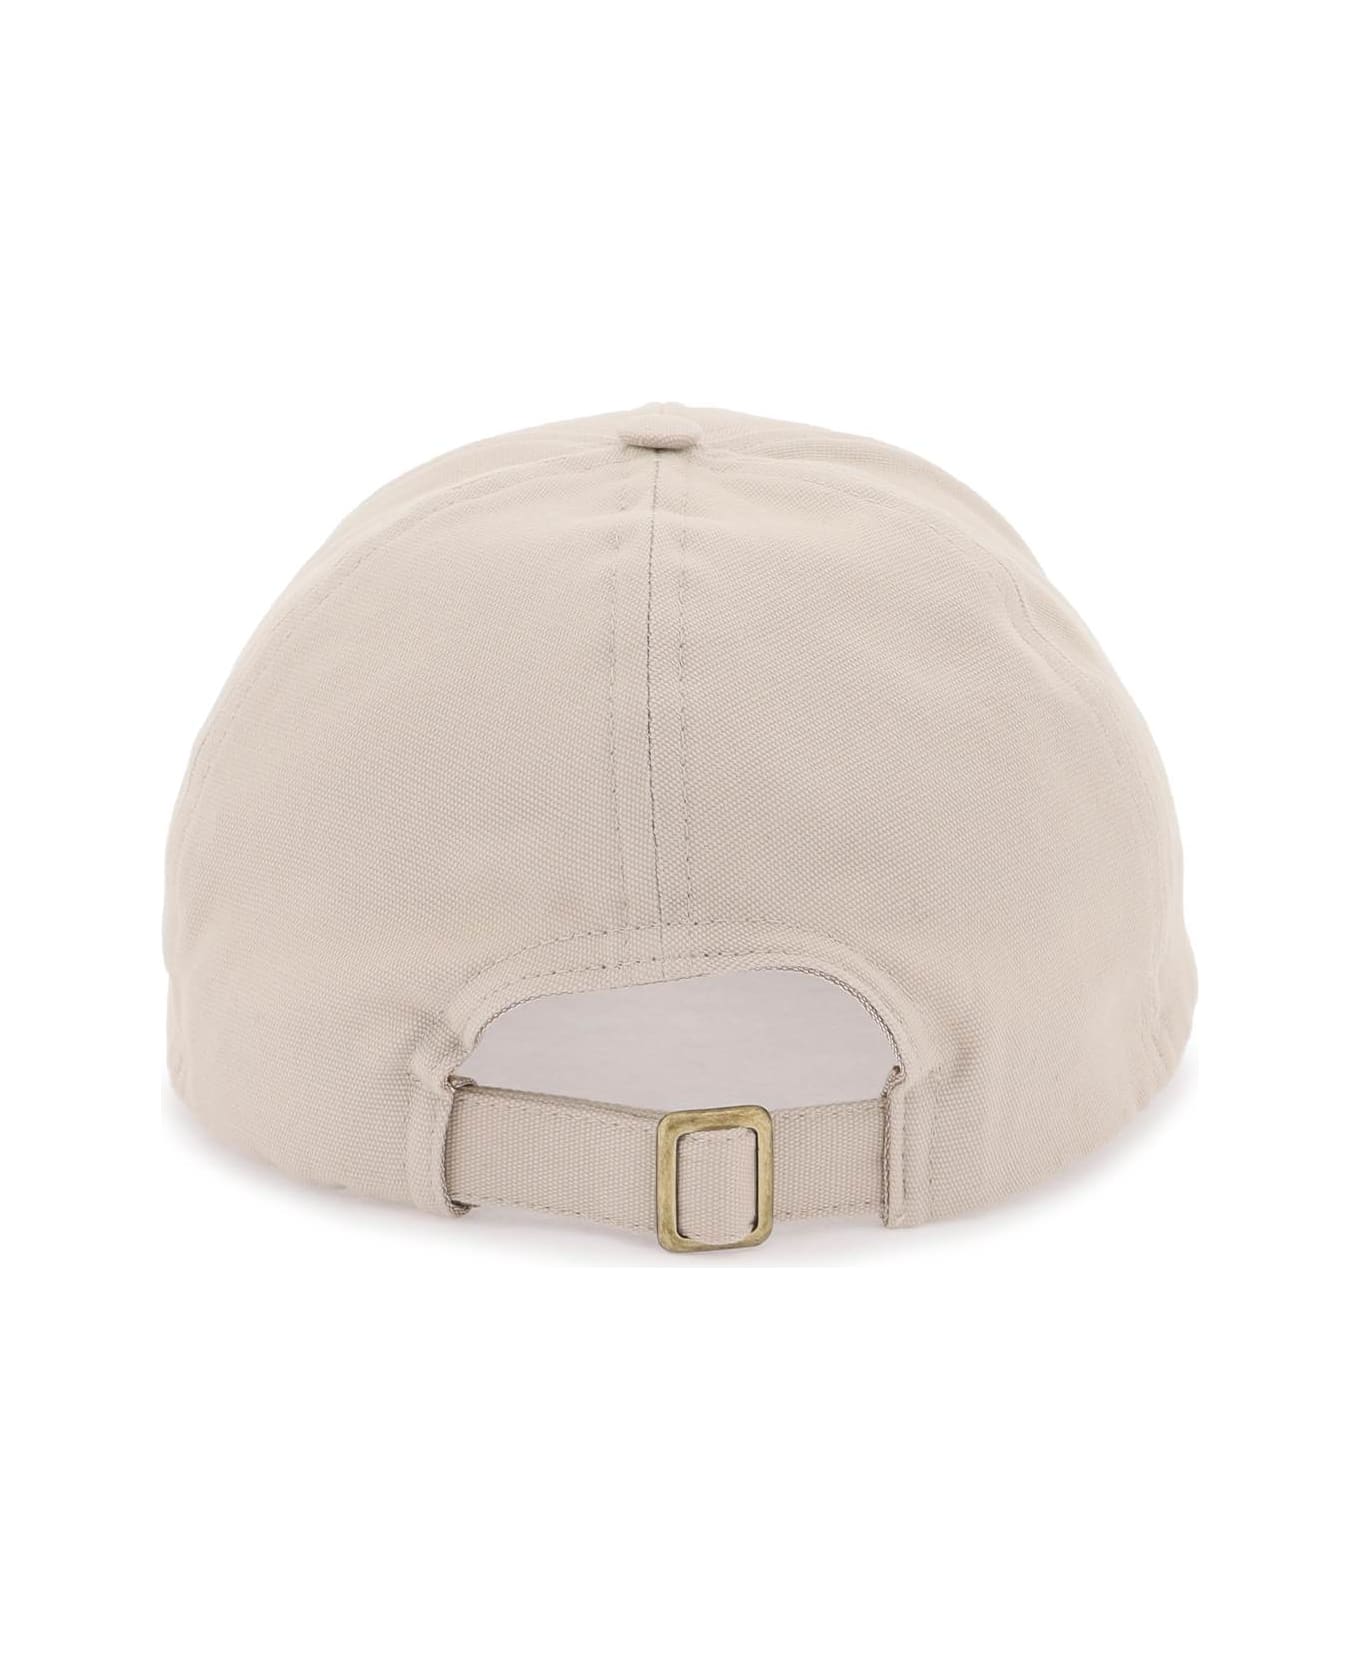 Vivienne Westwood Uni Colour Baseball Cap With Orb Embroidery - SAND (Beige) アクセサリー